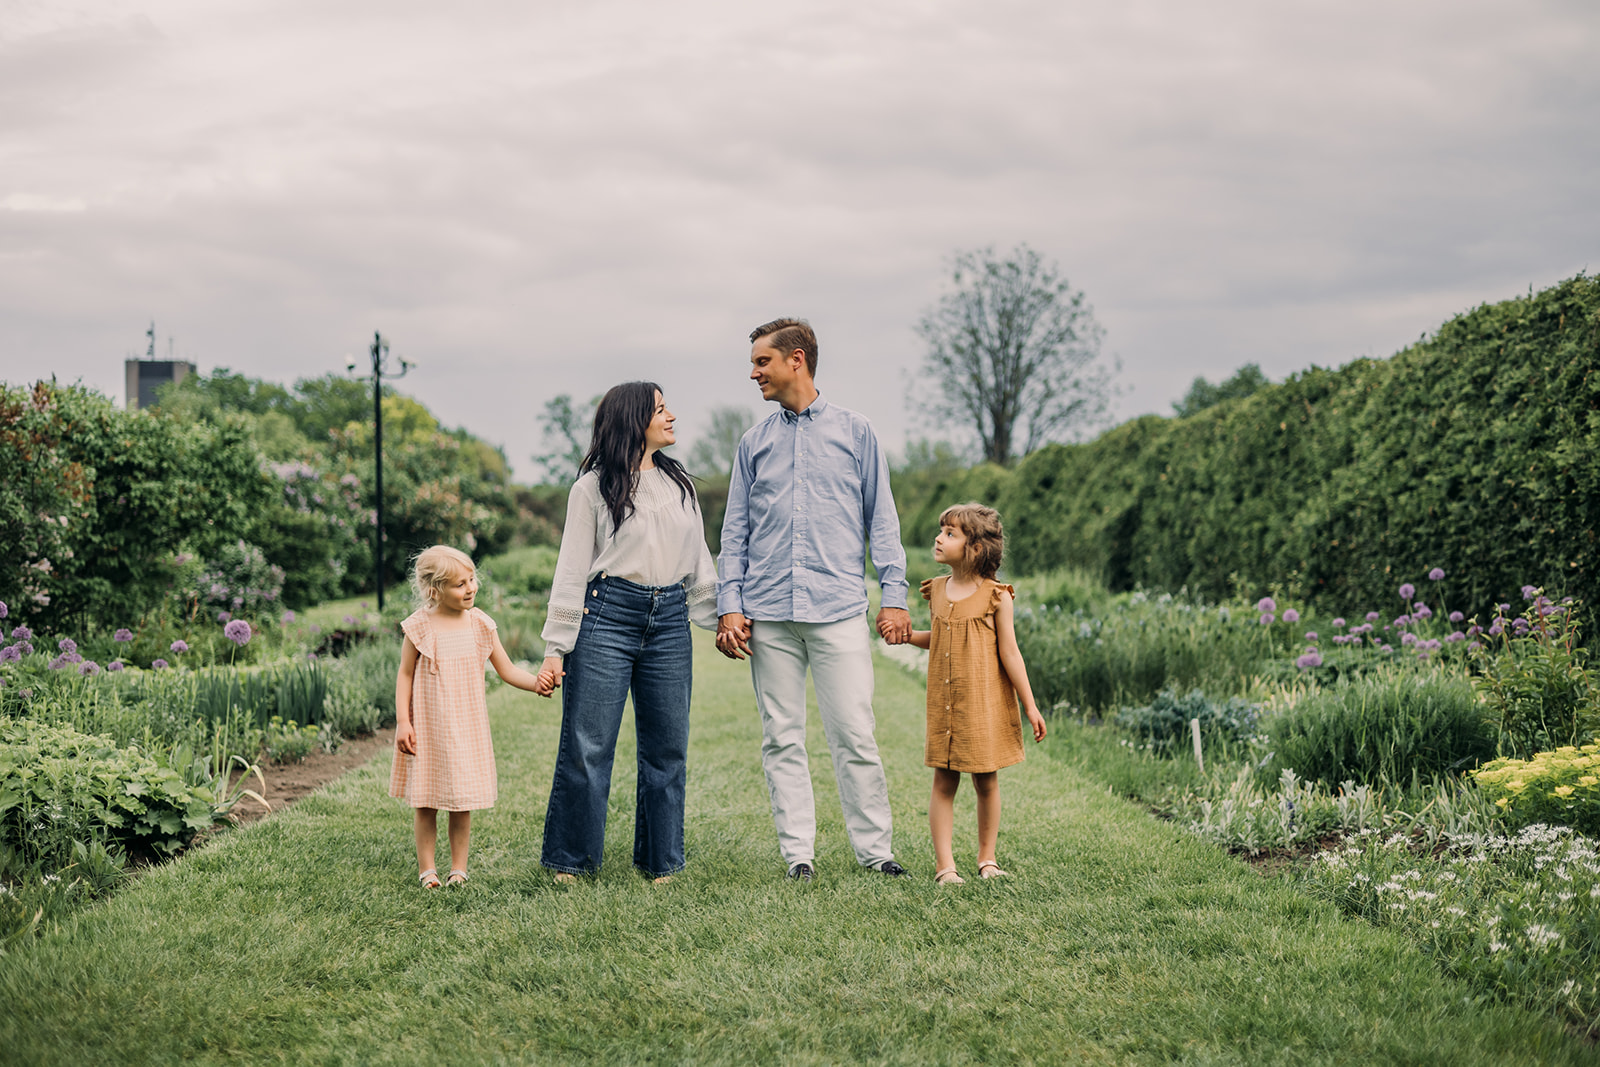 Ottawa's fields provide a perfect backdrop for family portraits